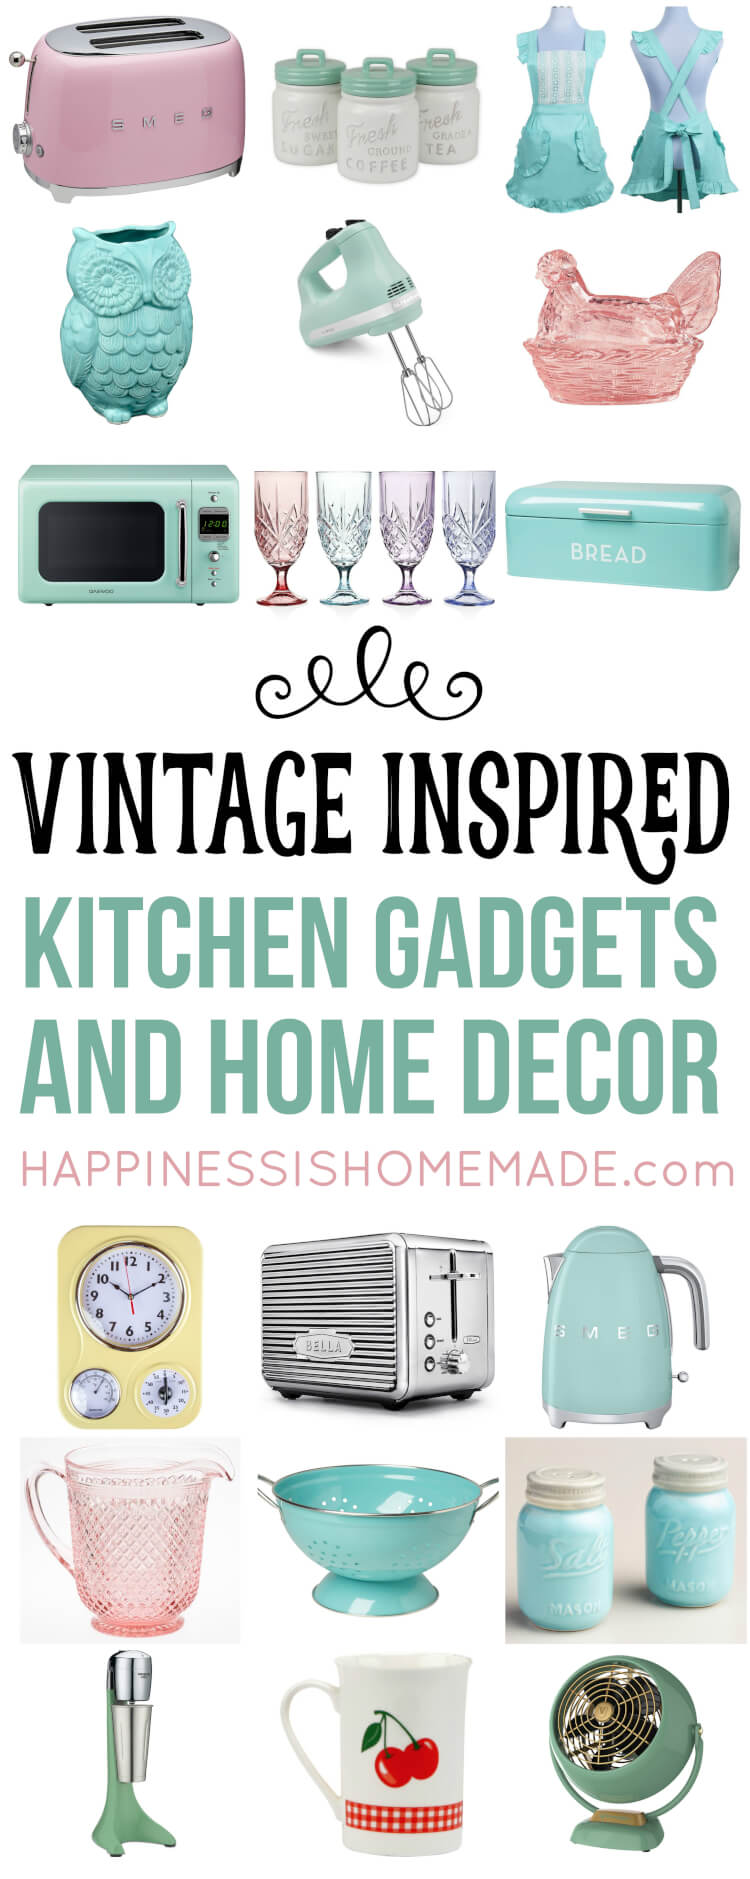 Vintage Inspired Kitchen Decor & Gadgets - Happiness is Homemade